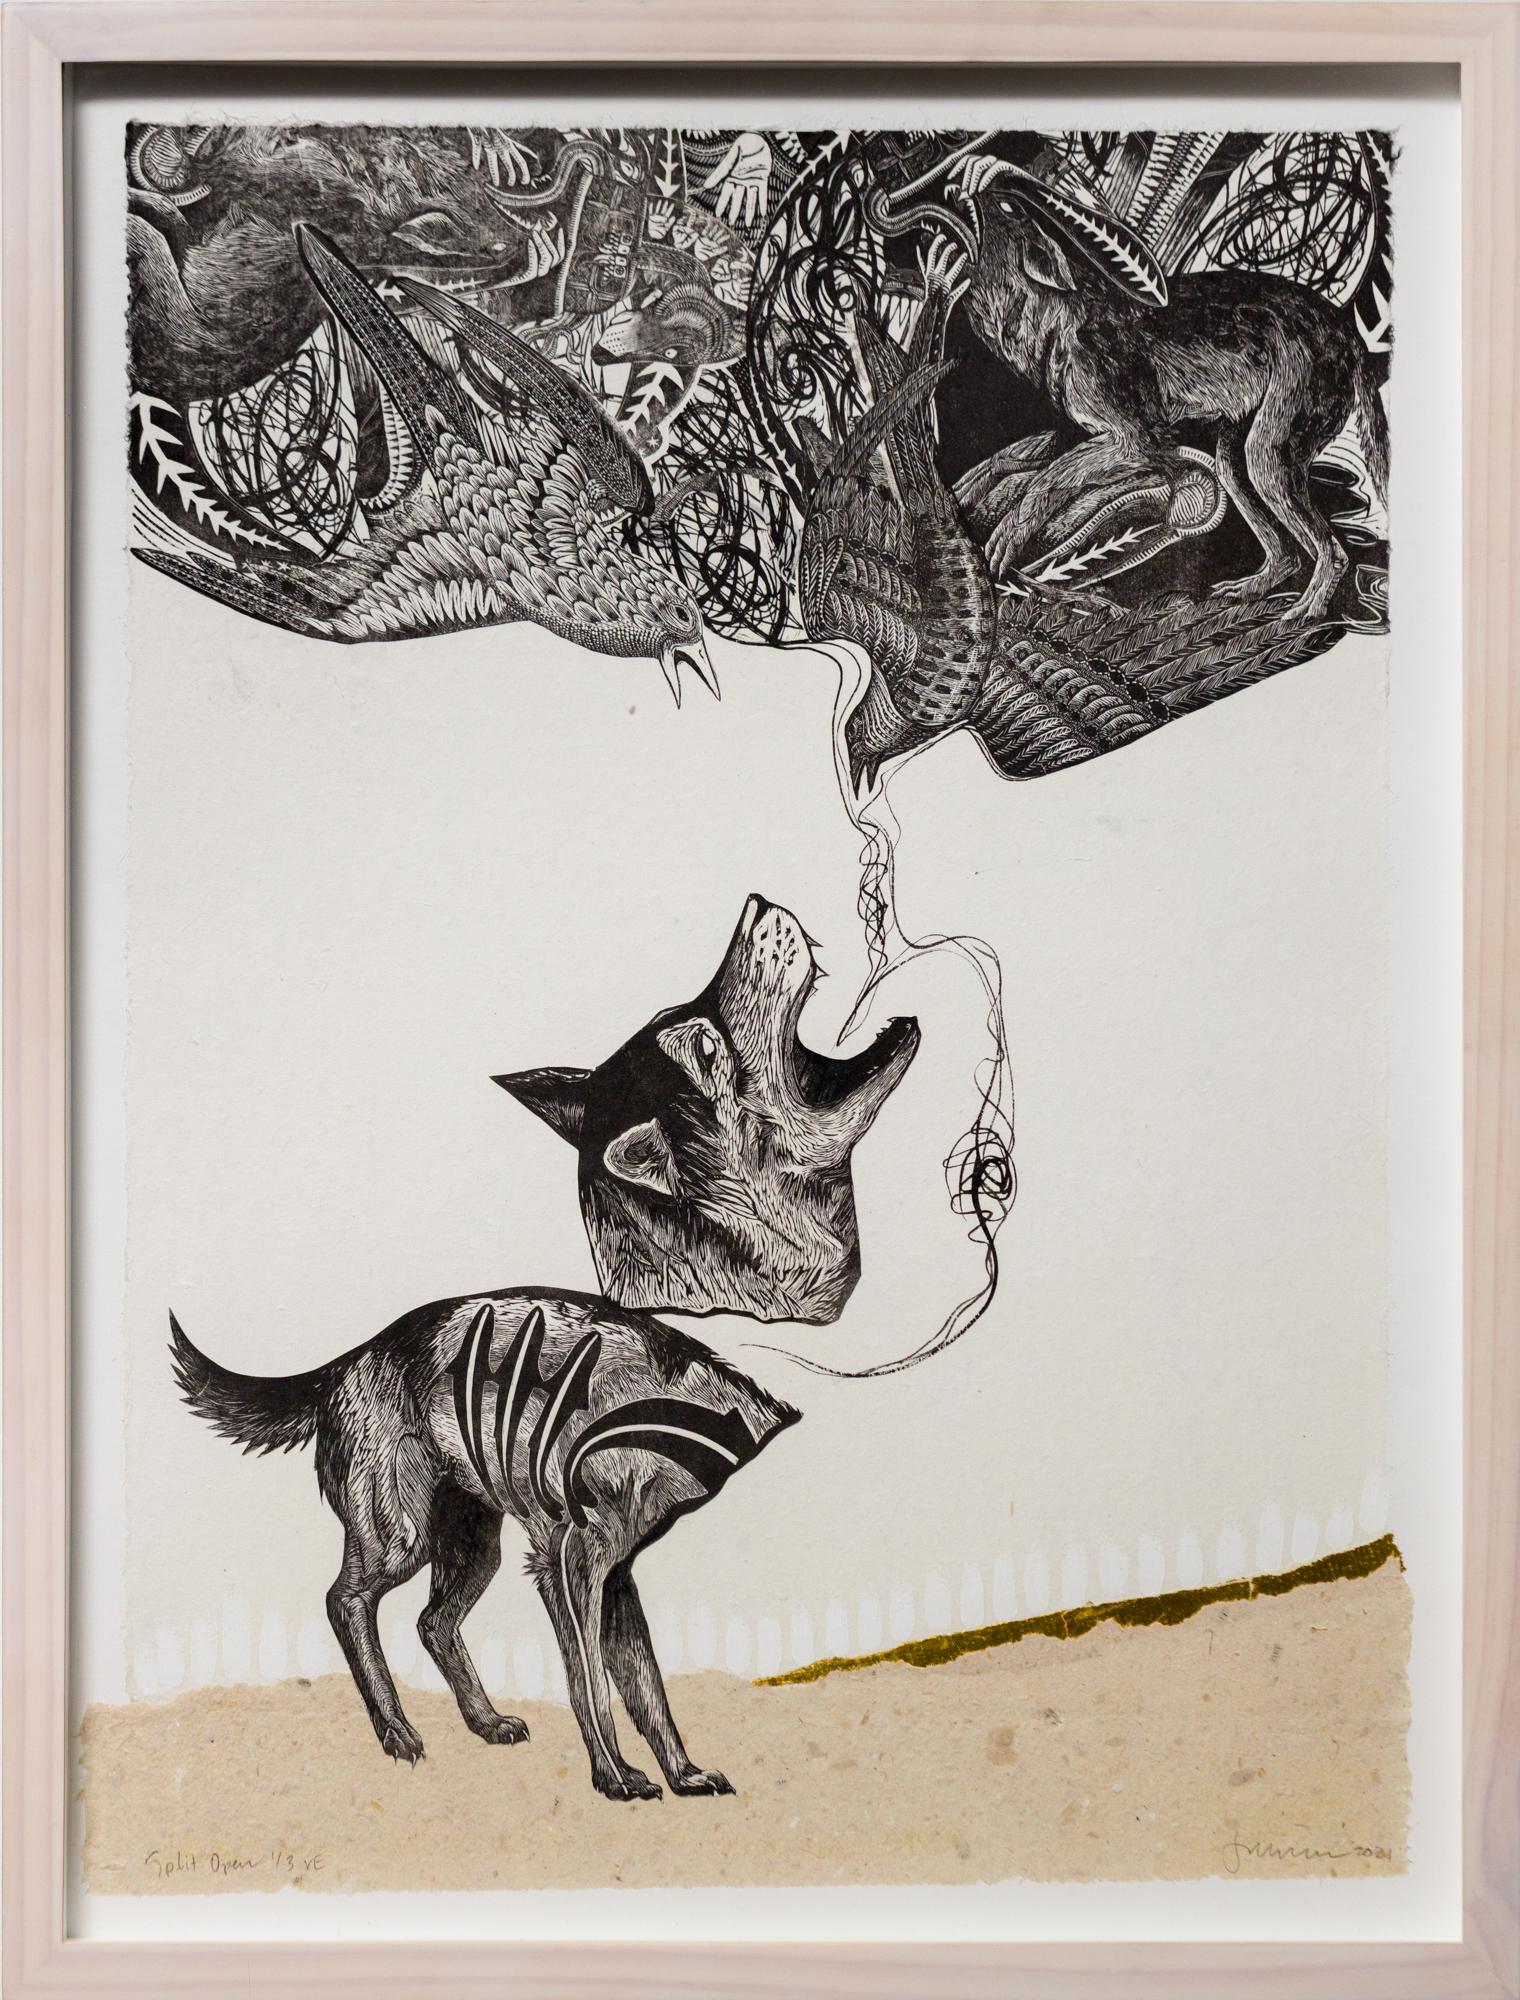 "Split Open", Depiction of Animals, Relief Engraving, Collage, Mixed Media